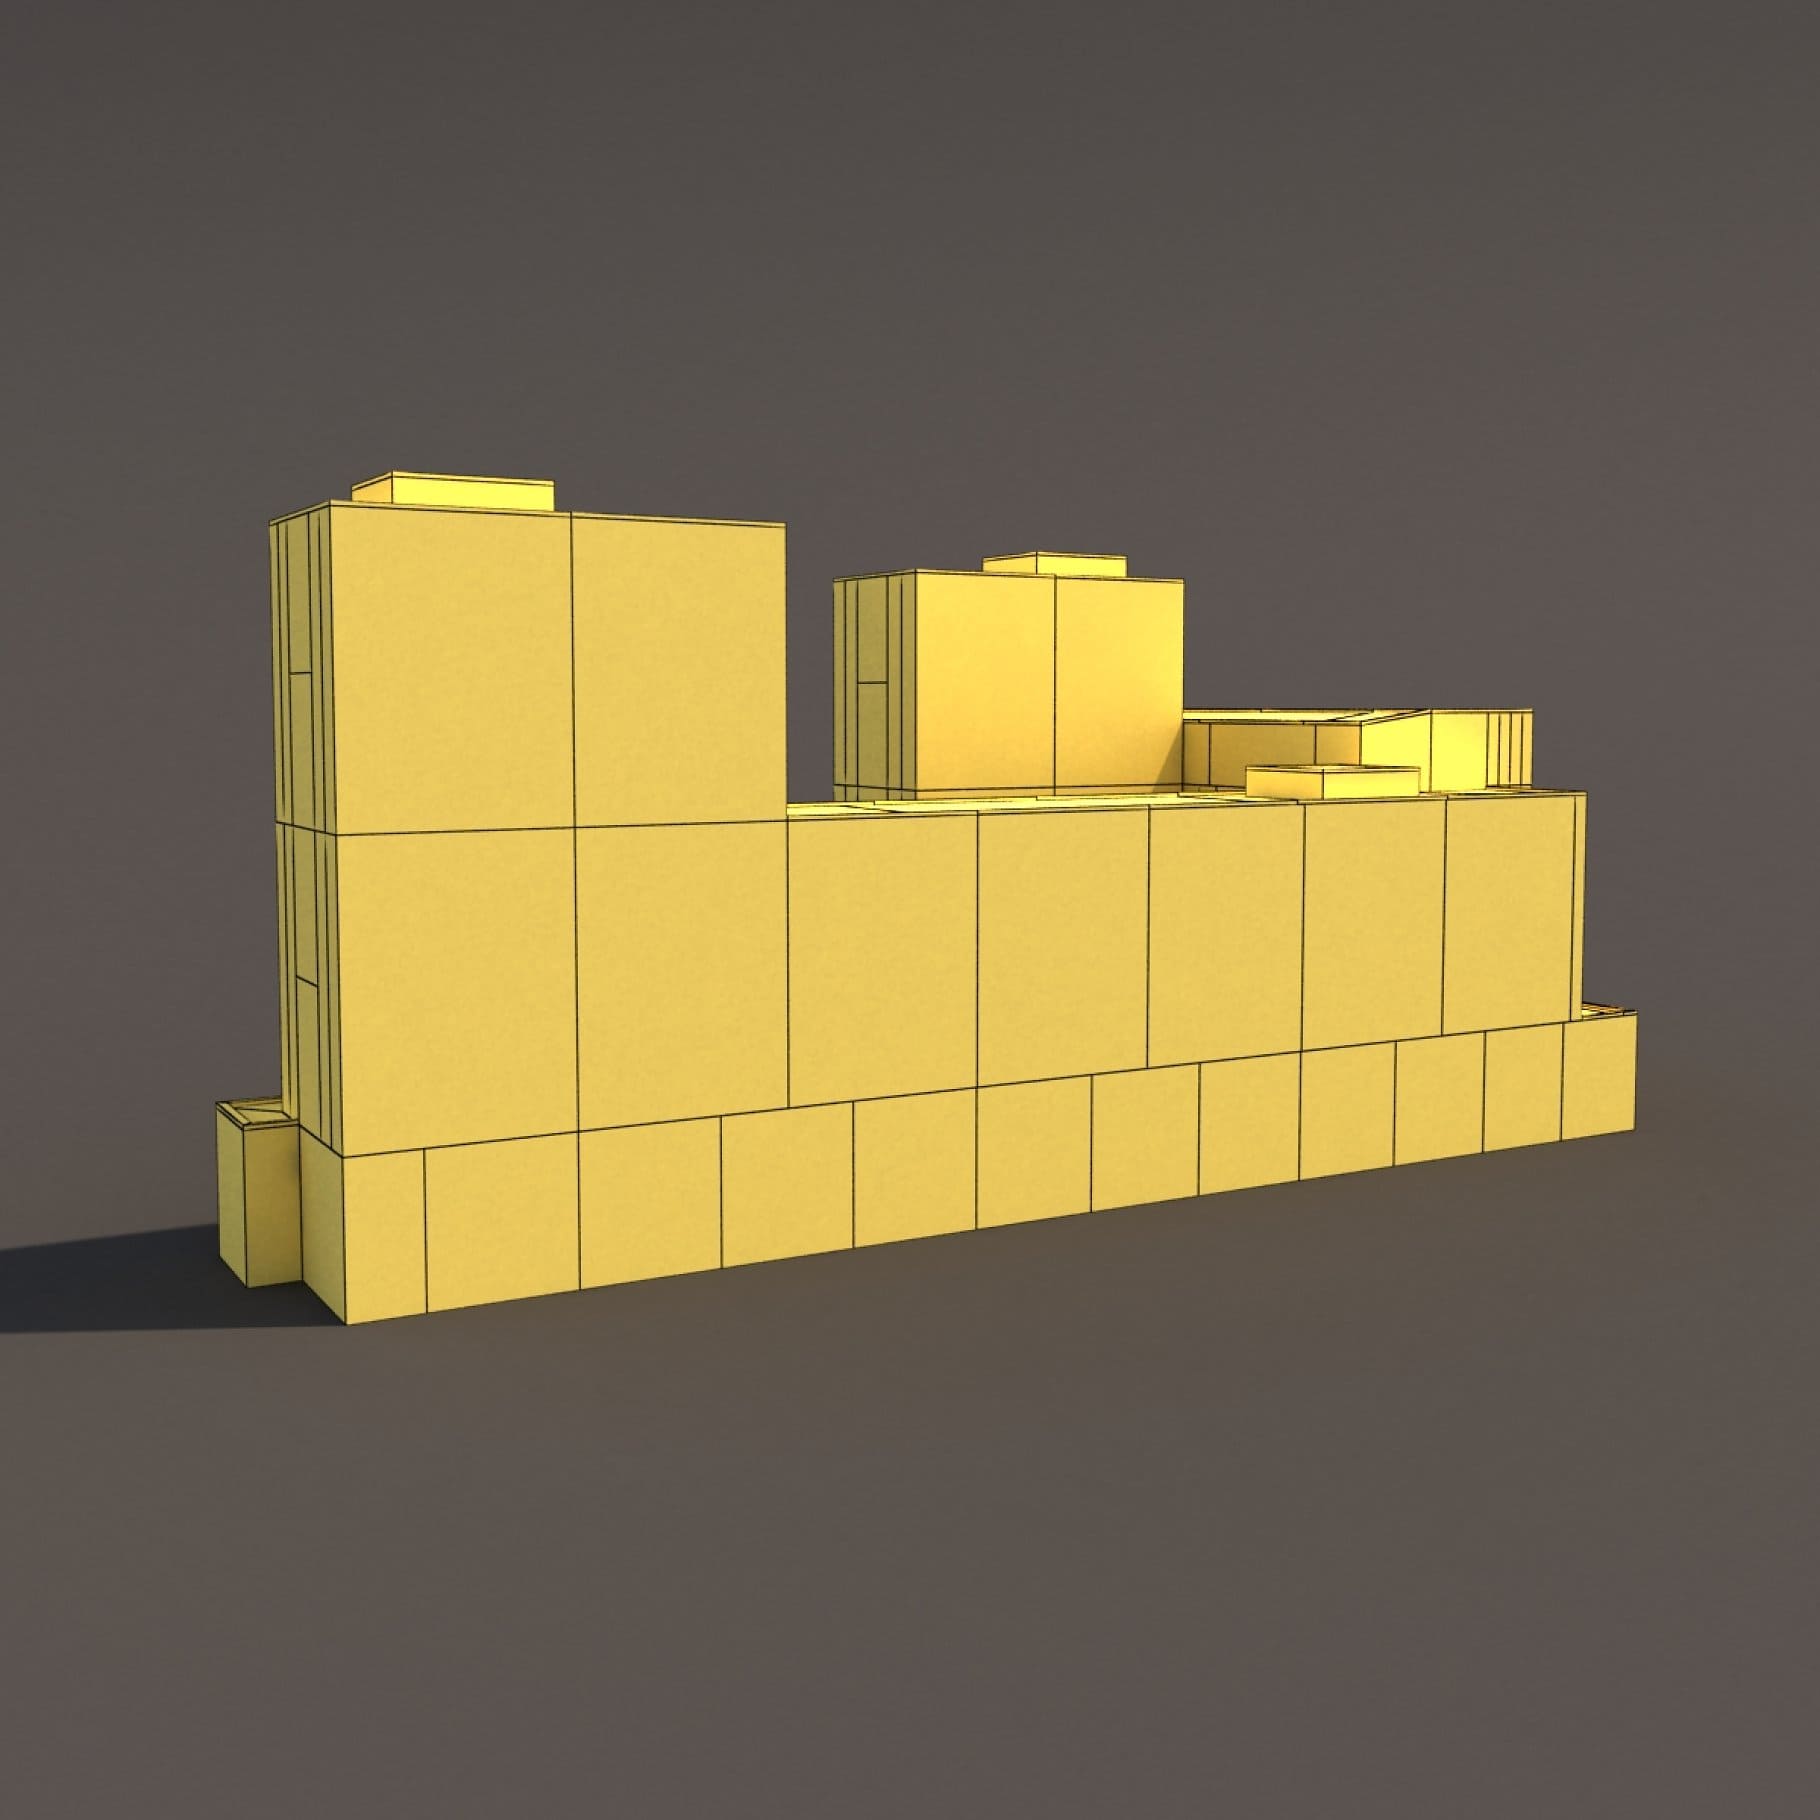 Back side of a yellow 3D model of an office building.